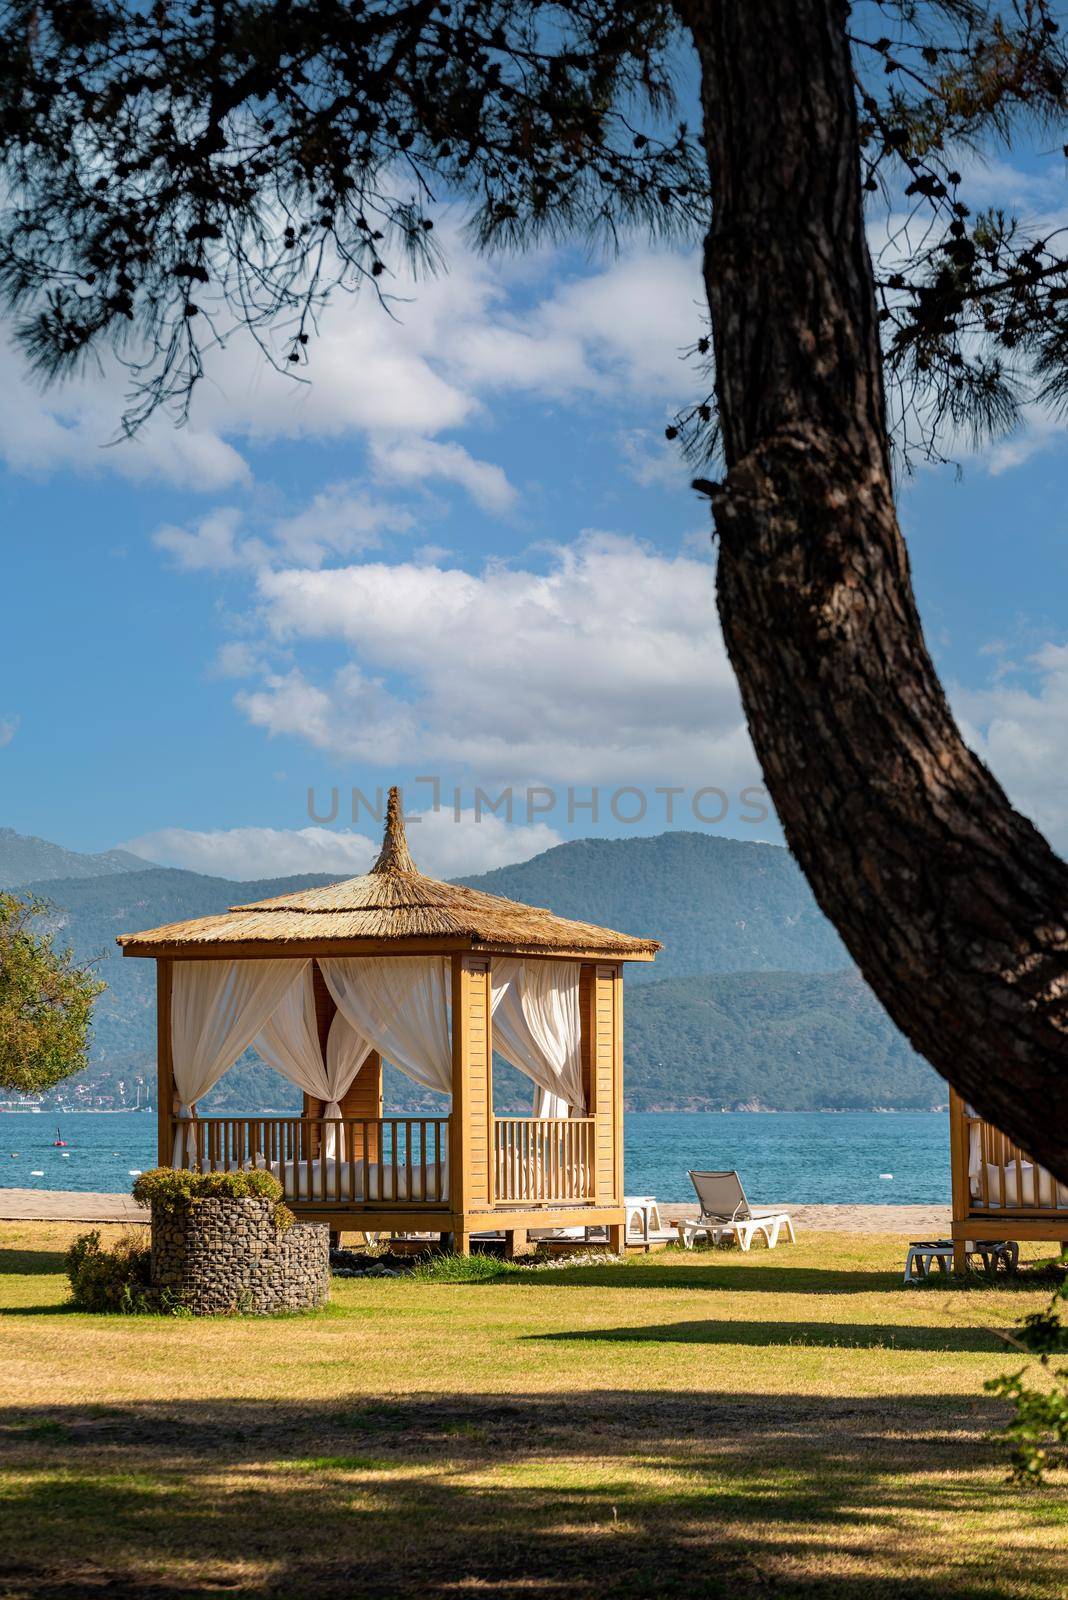 Luxurious and comfortable cabana among the trees on the hotel beach by Sonat